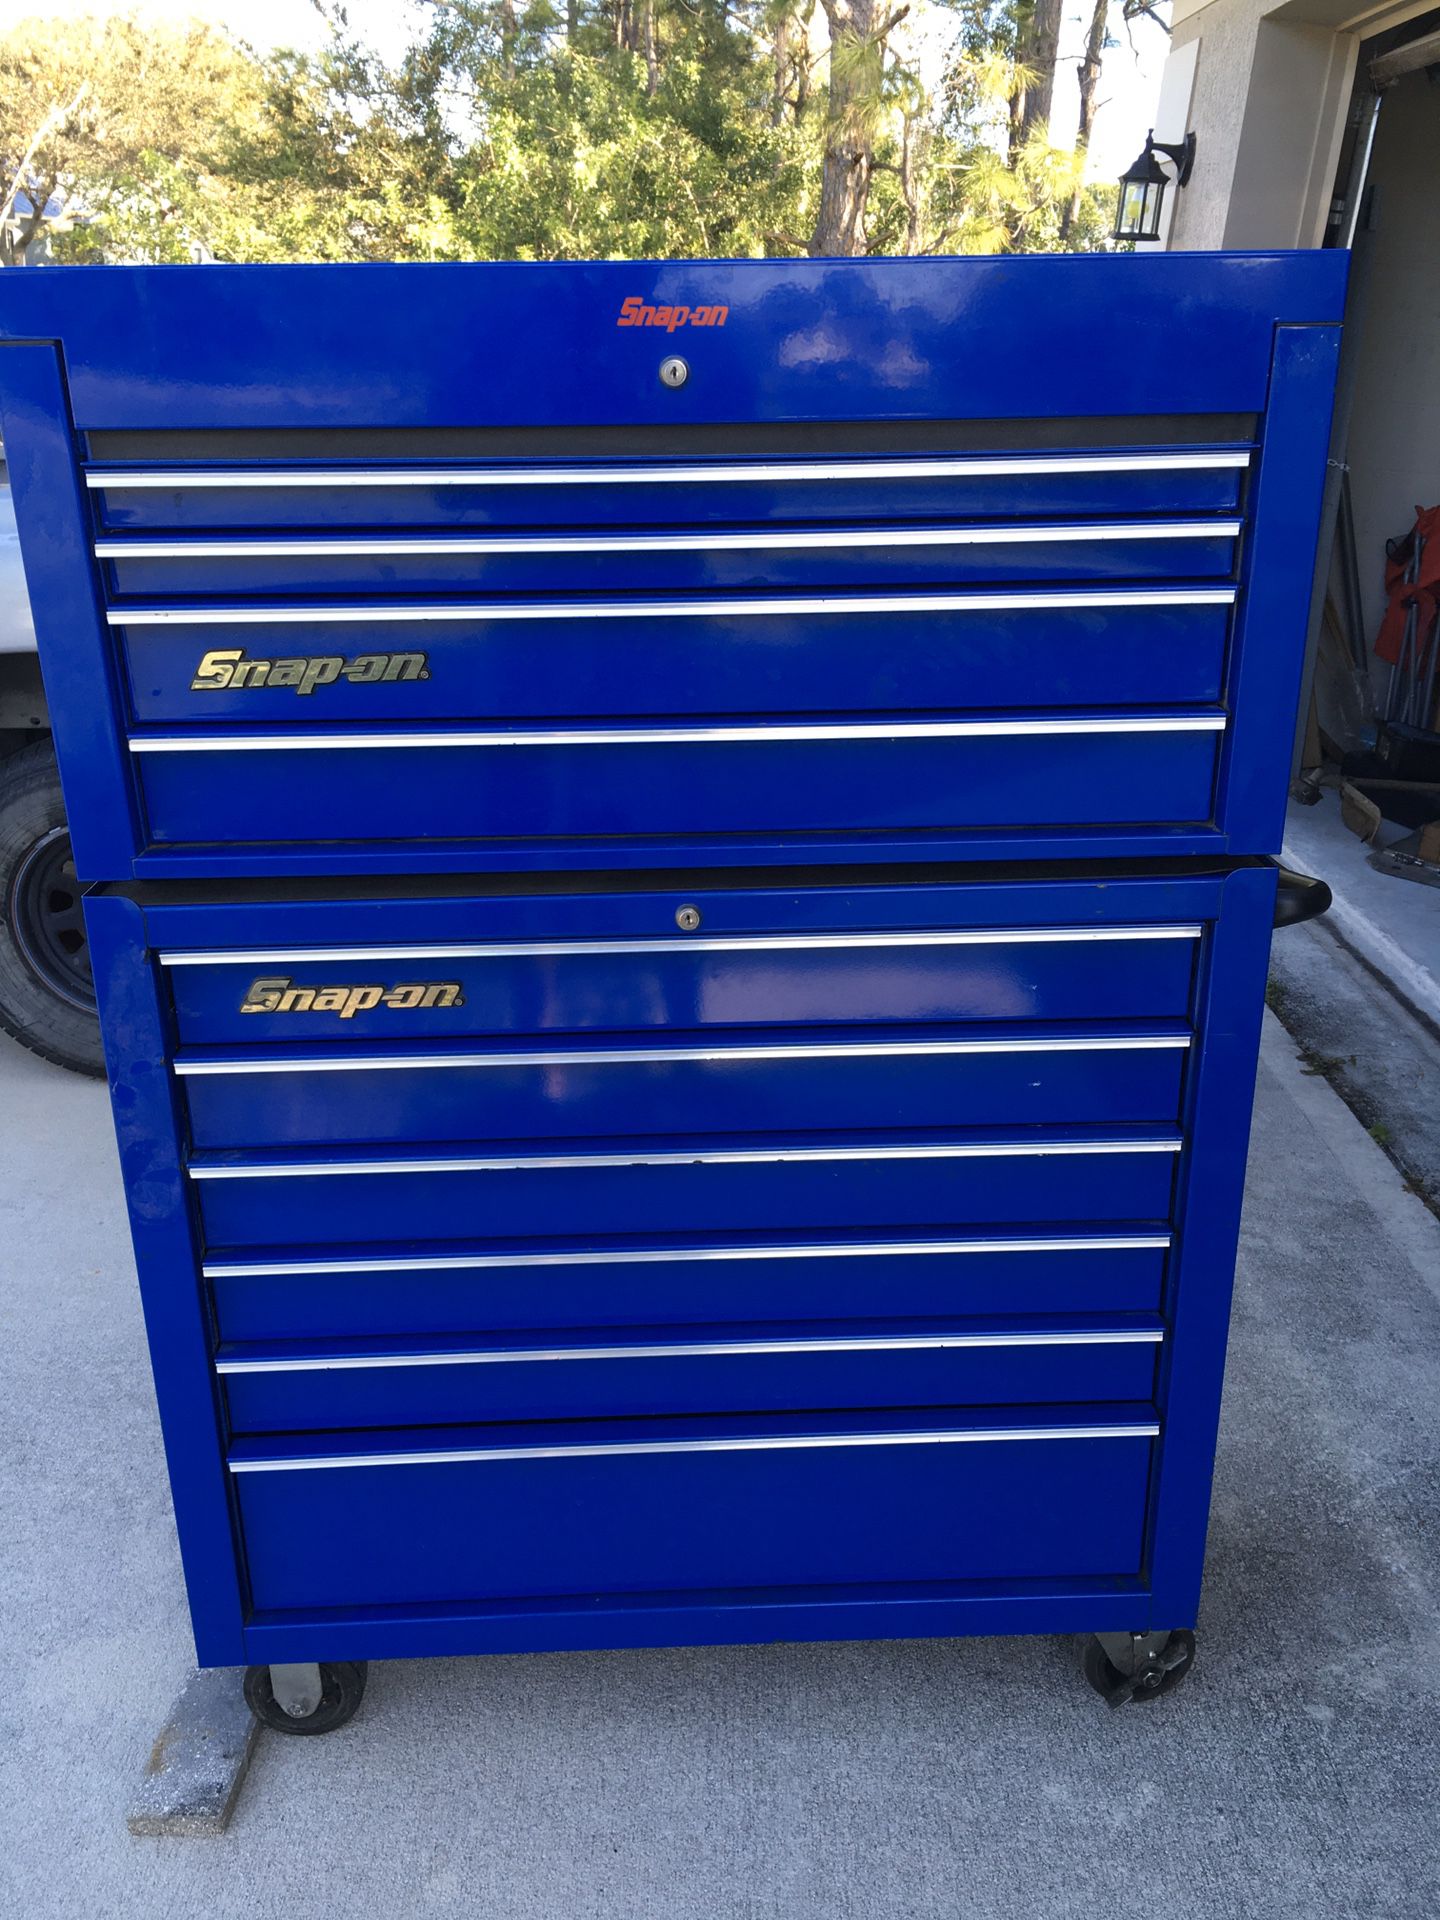 Snap On double stack tool box